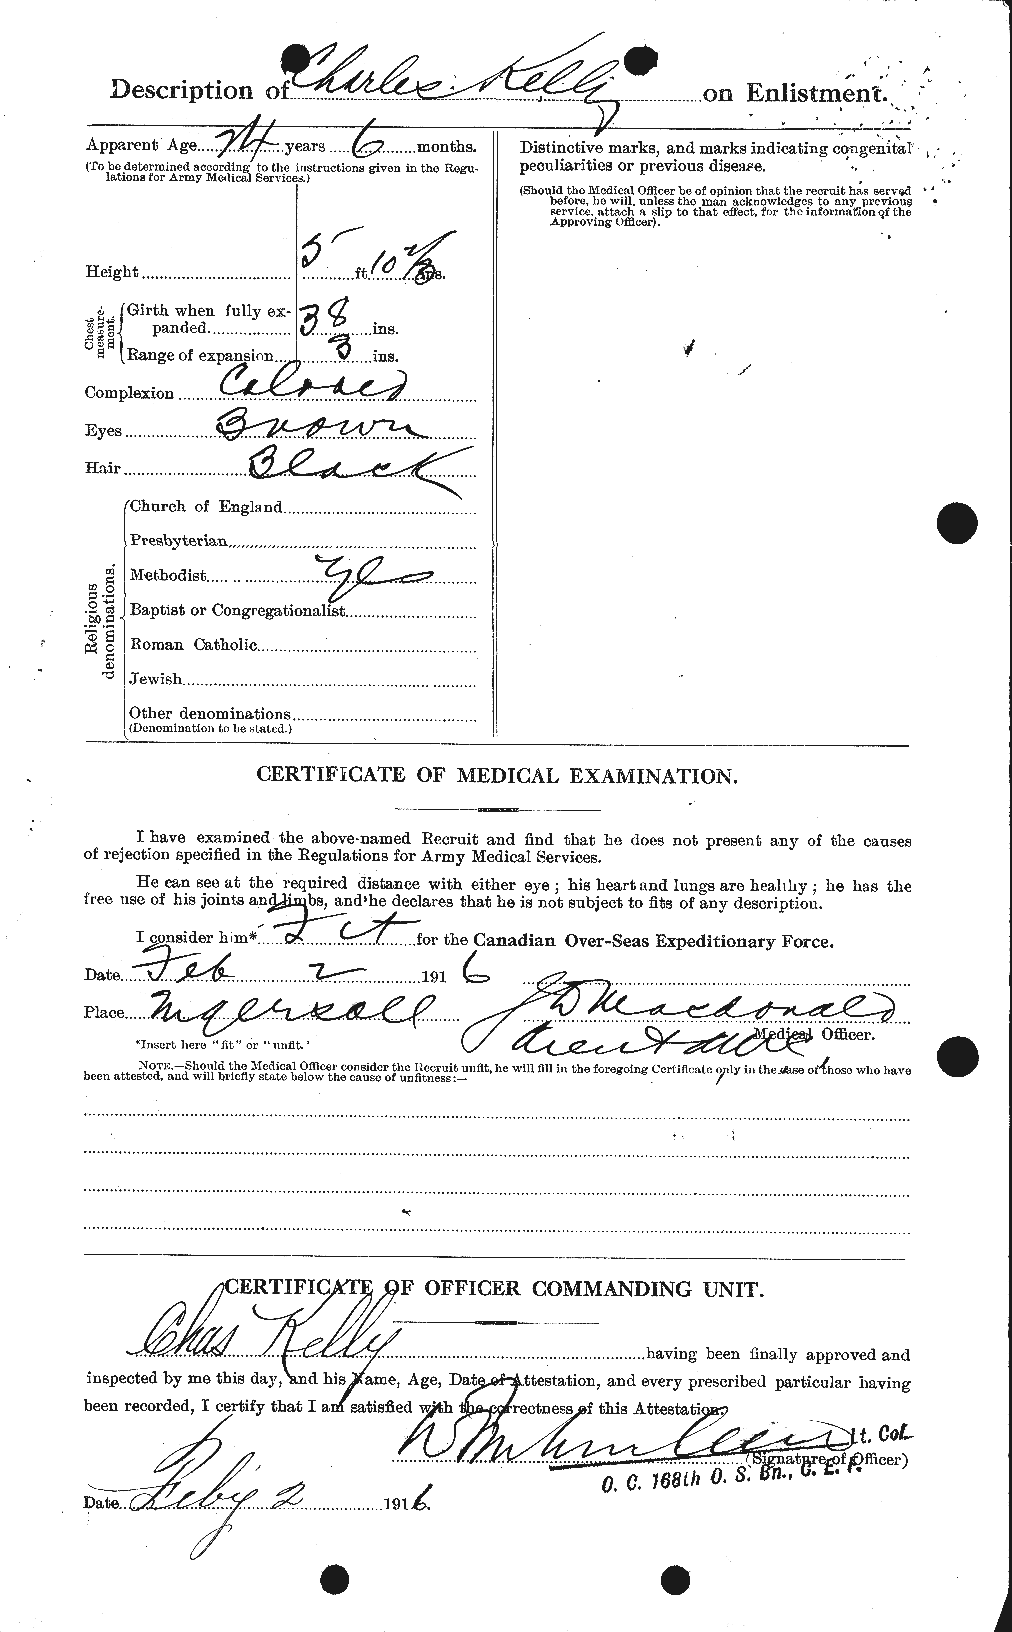 Personnel Records of the First World War - CEF 431236b